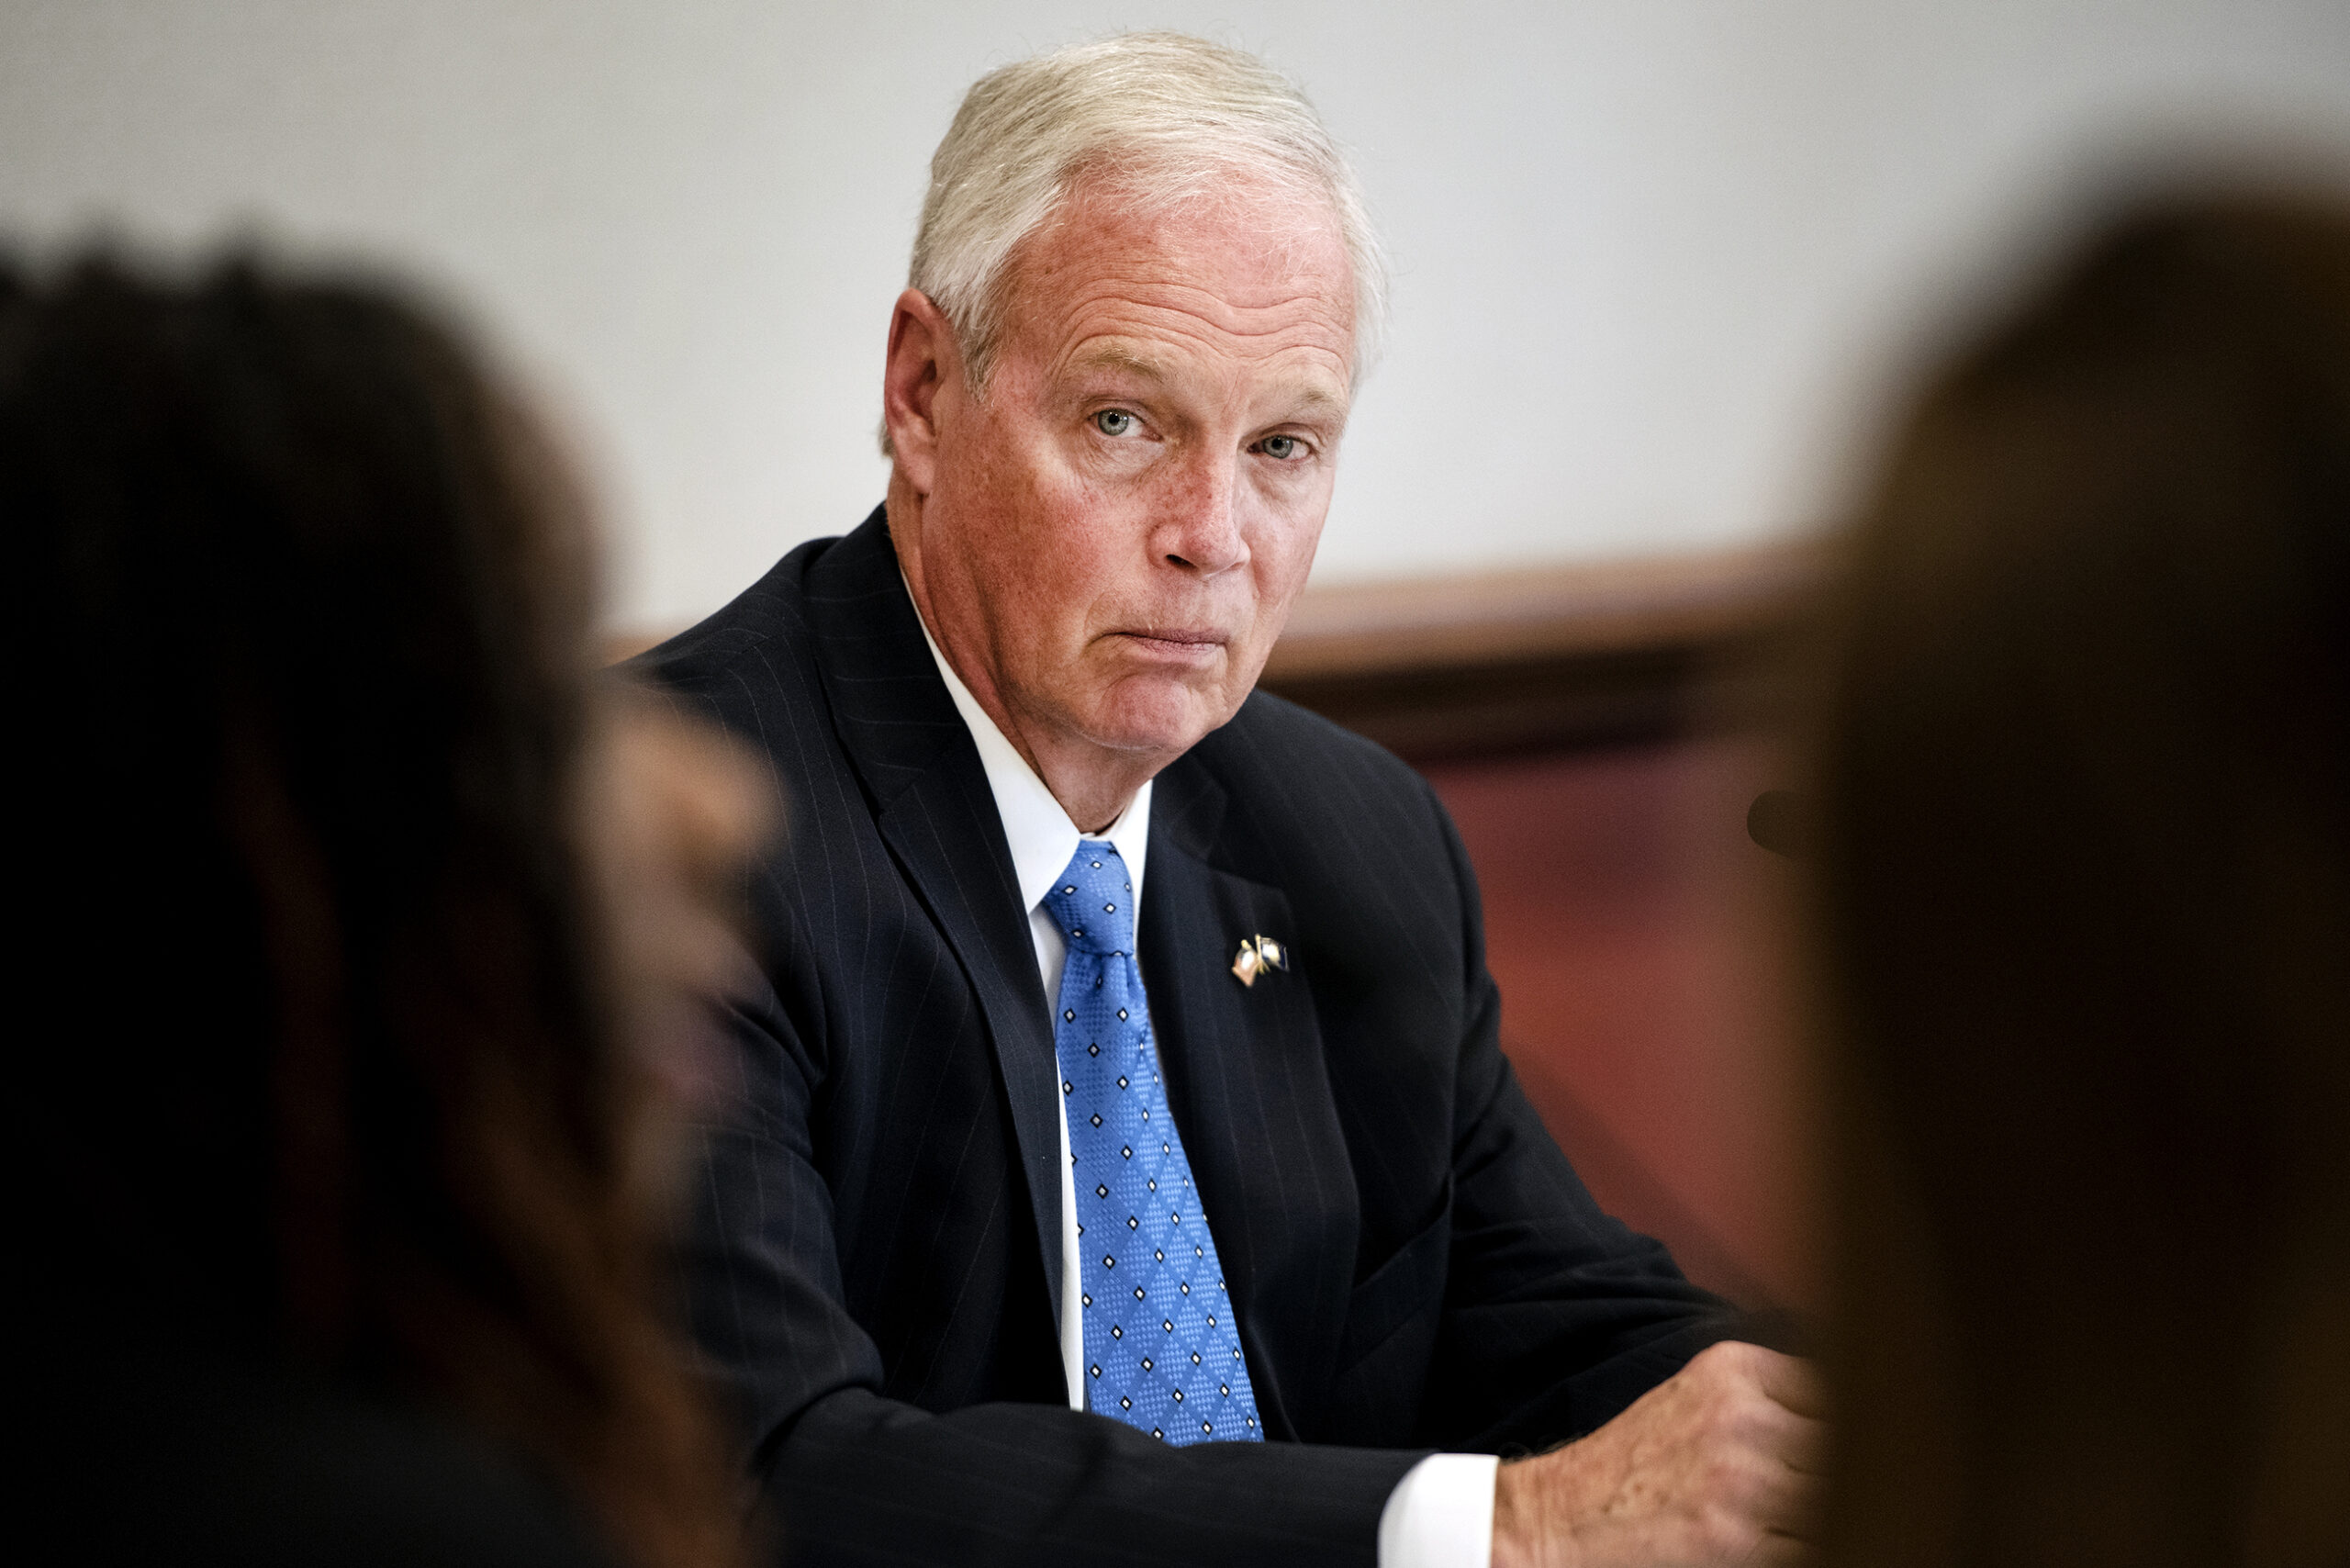 Sen. Ron Johnson watches guests as they speak during a press conference.